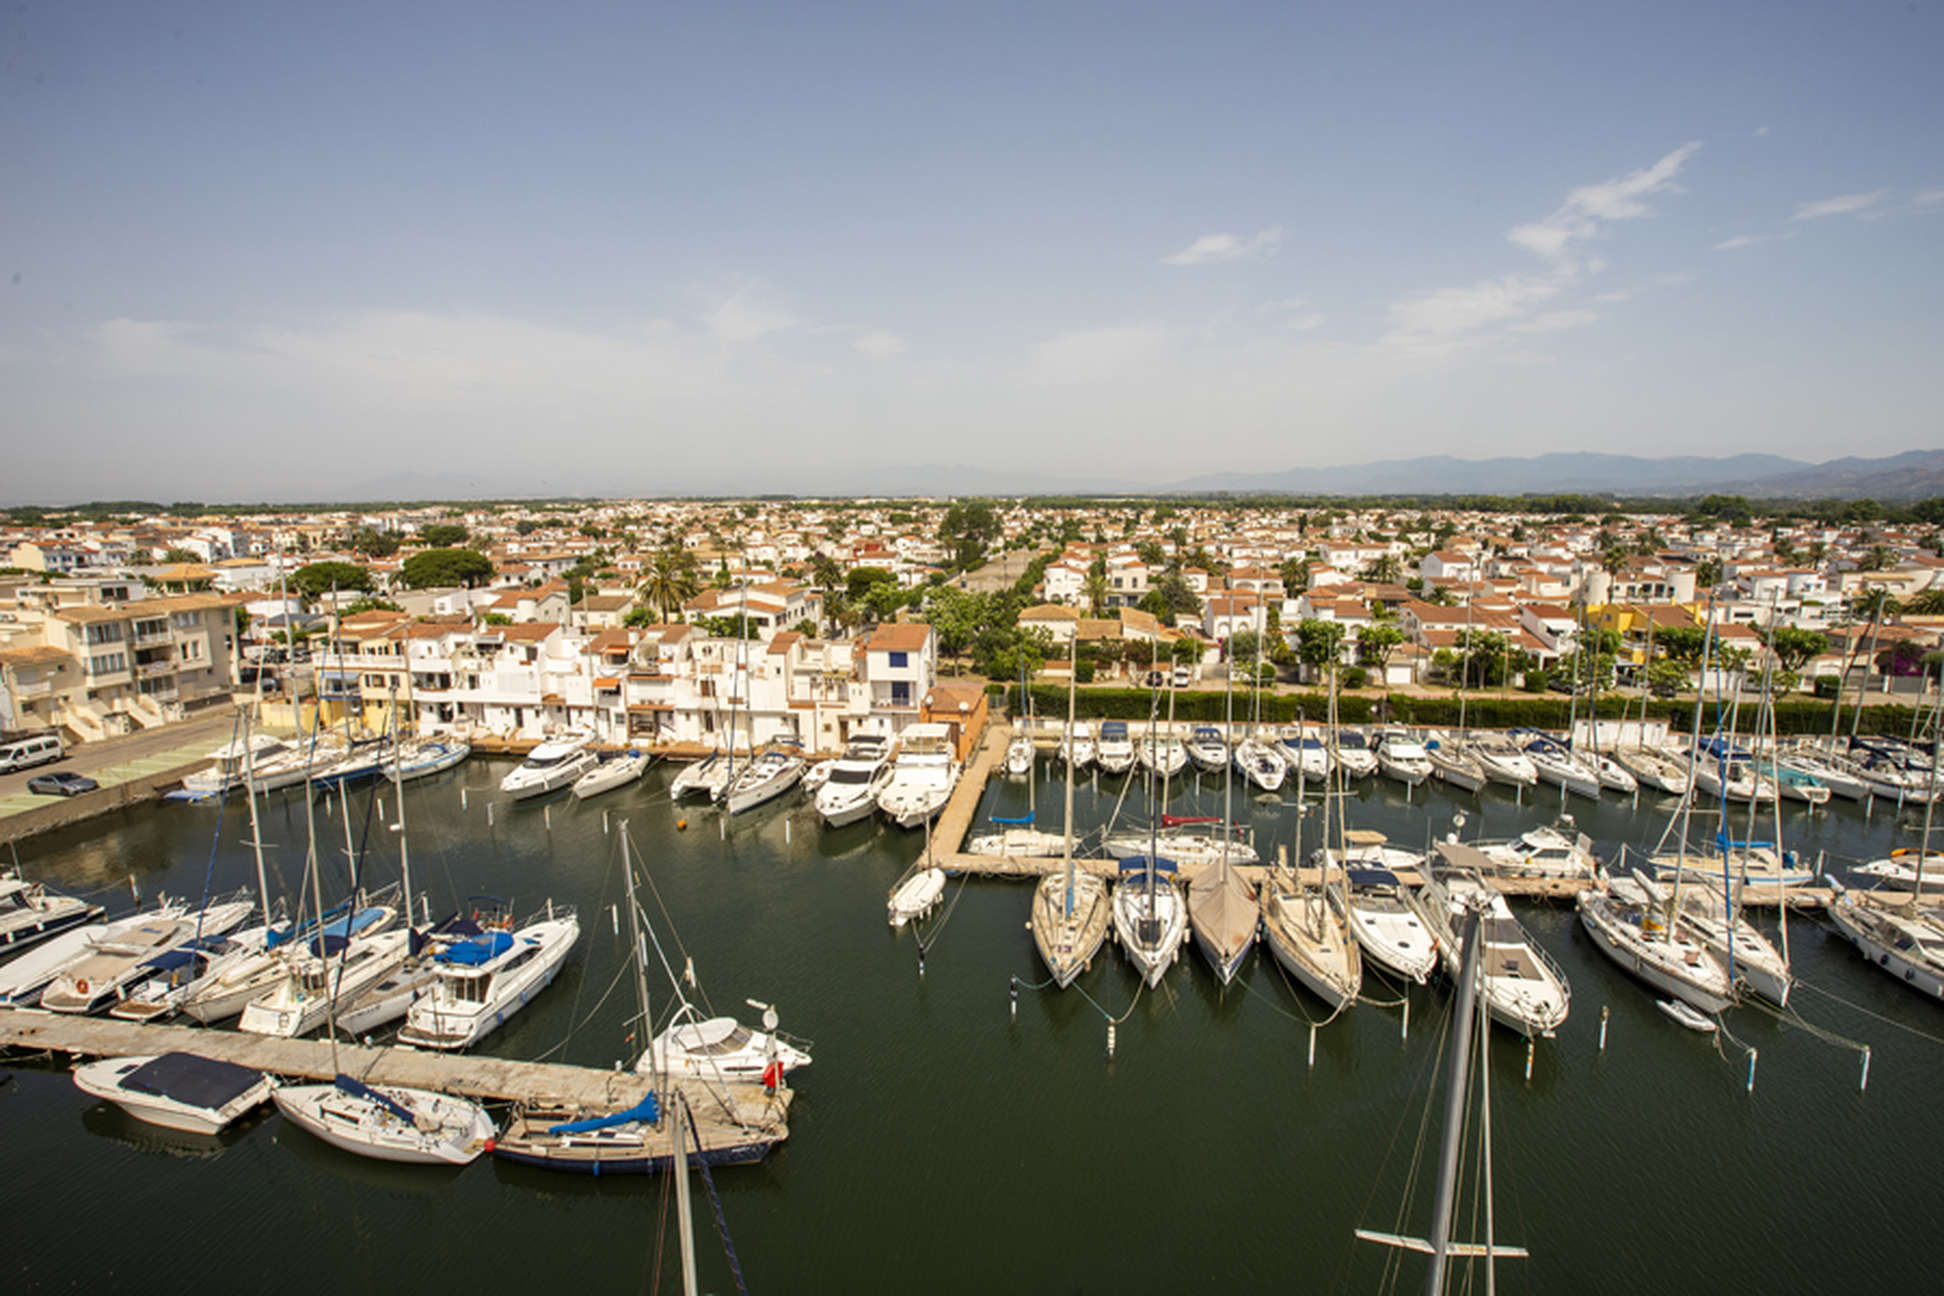 Fantastic spacious penthouse with sea view in the harbor of Empuriabrava